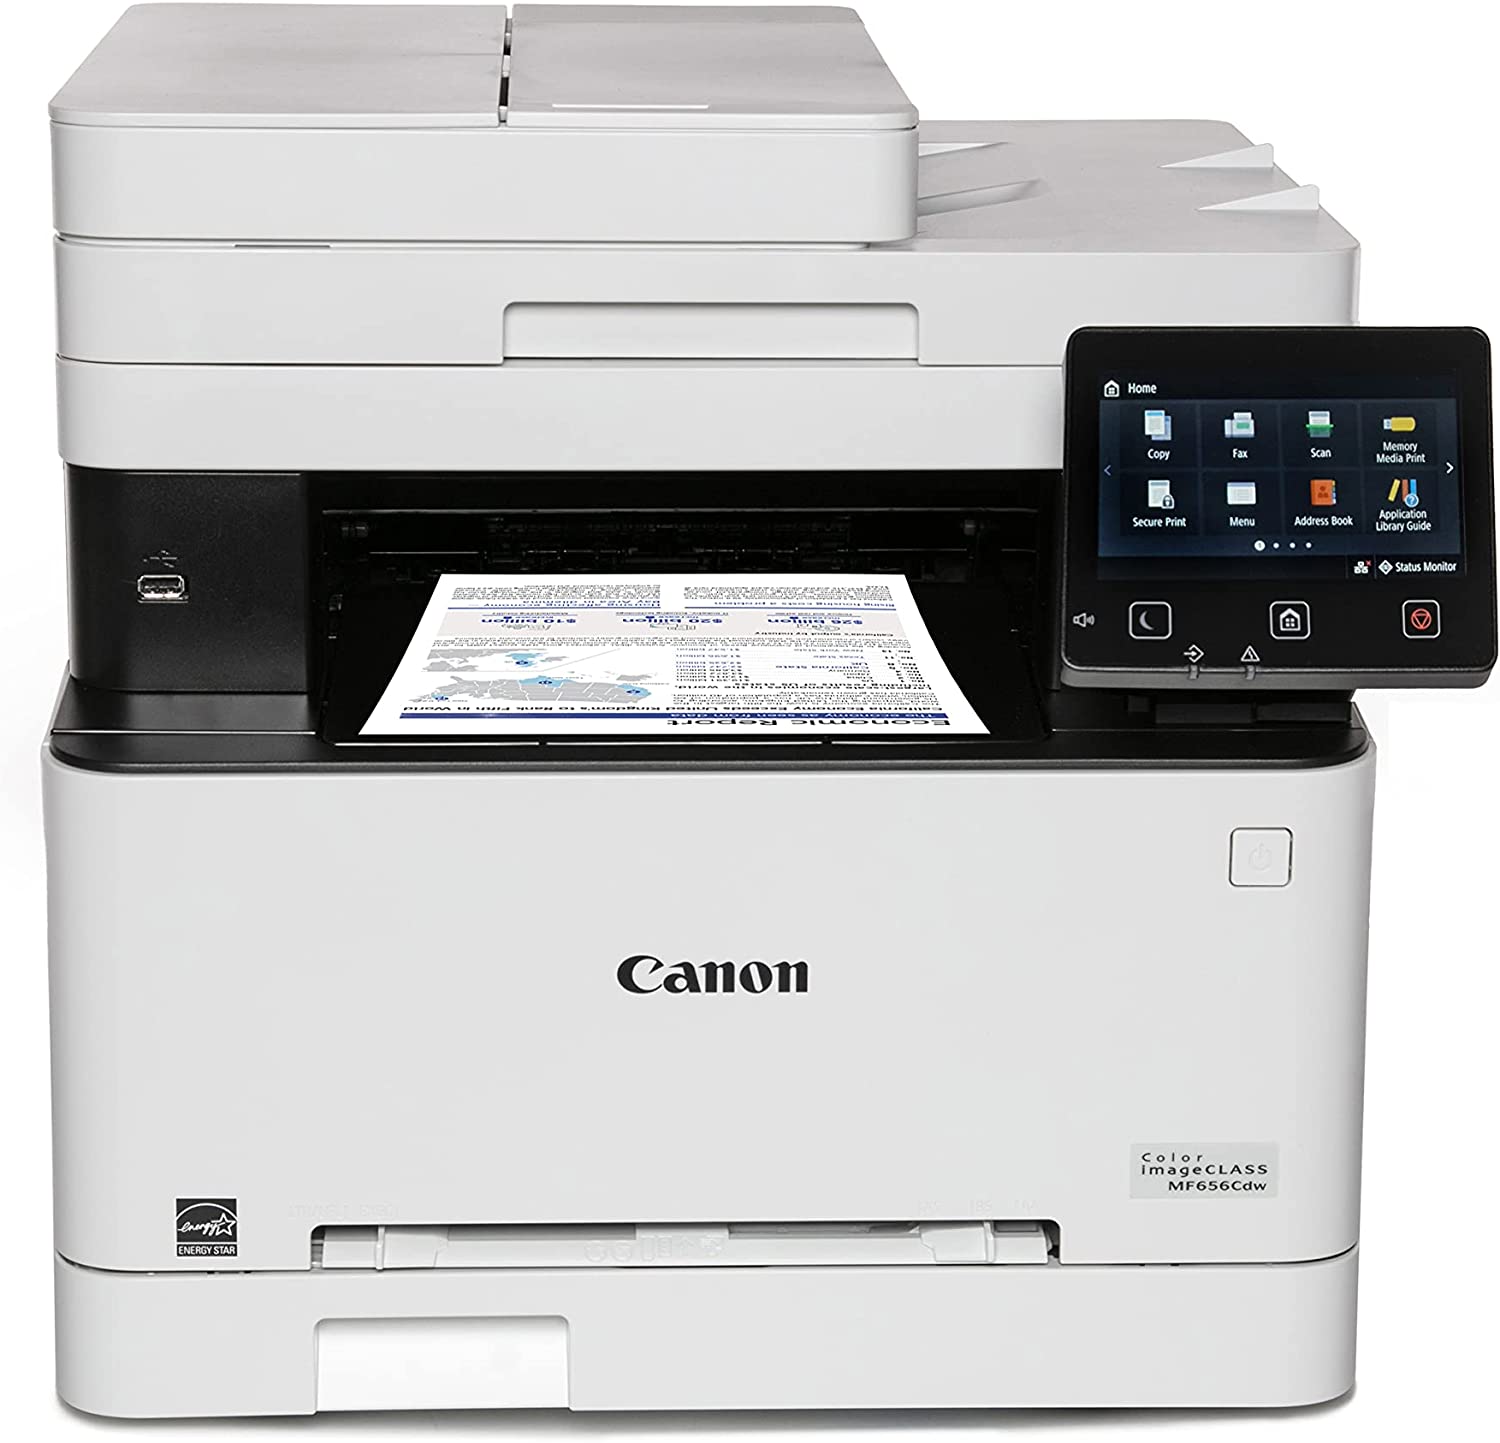 Canon imageClass MF656CDW Wireless All-In-One Color Laser Printer $280 + Free Shipping